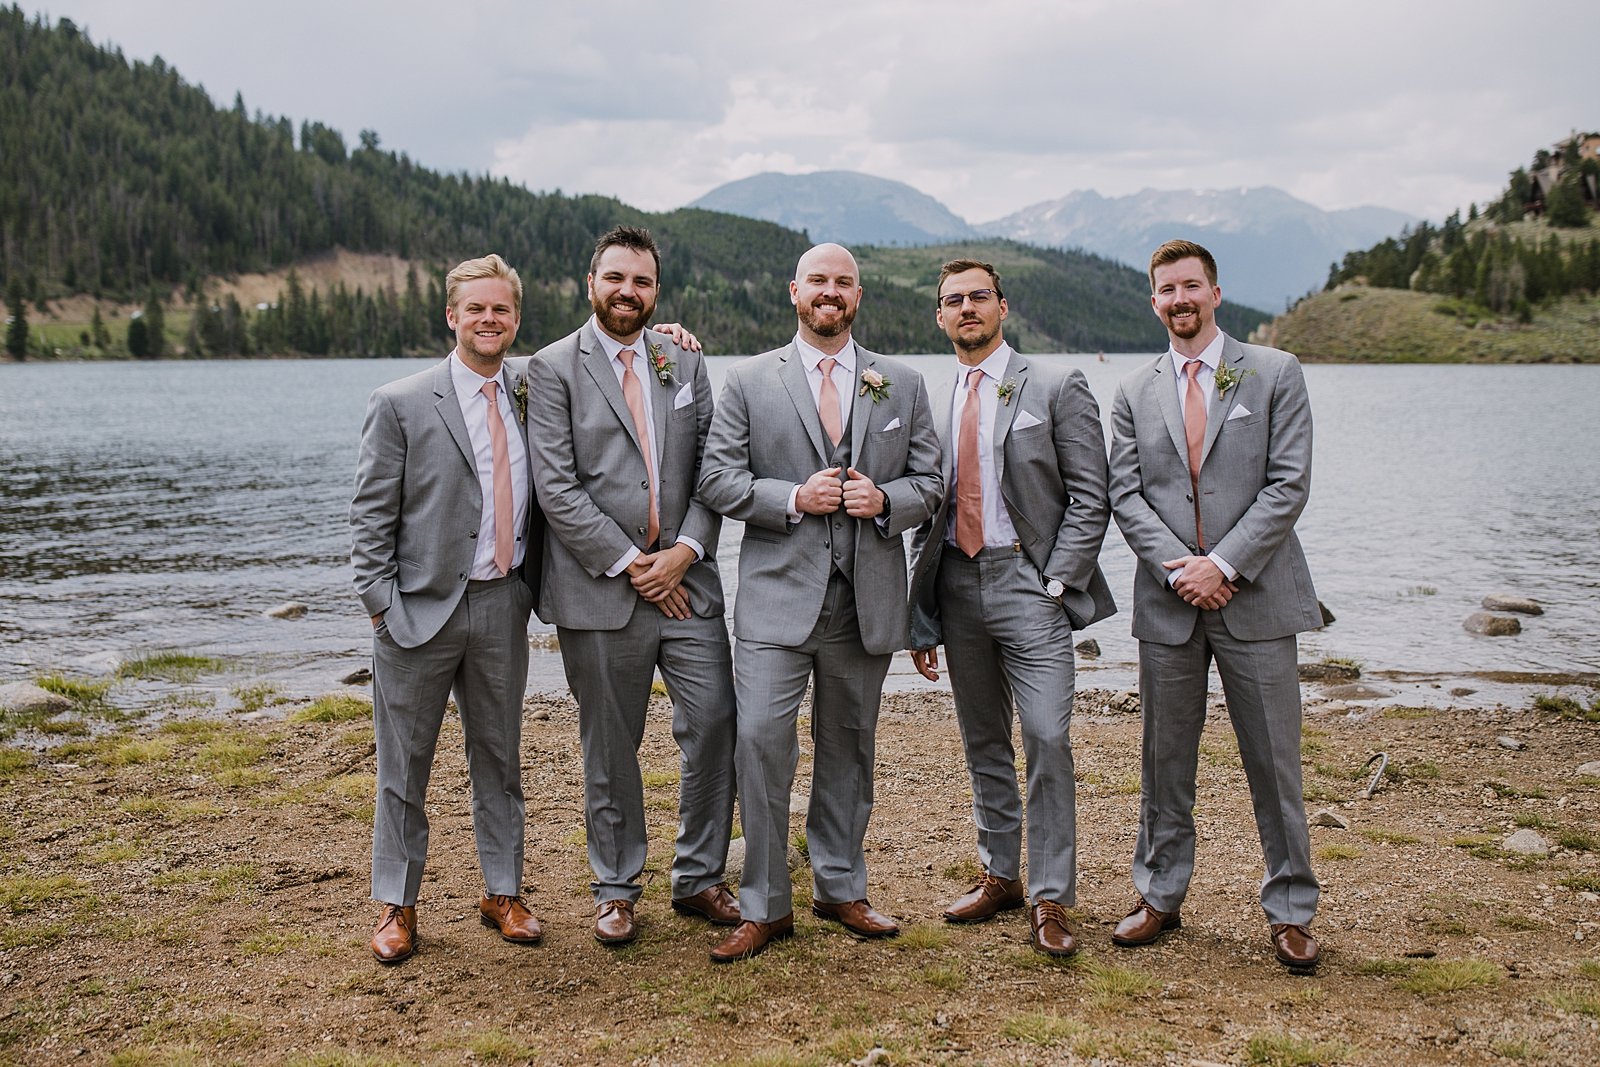 groom and groomsmen standing together on lake shore, lake shore group photo location, summit county wedding photographer, snake inlet wedding, snake inlet fishing, summit county wedding